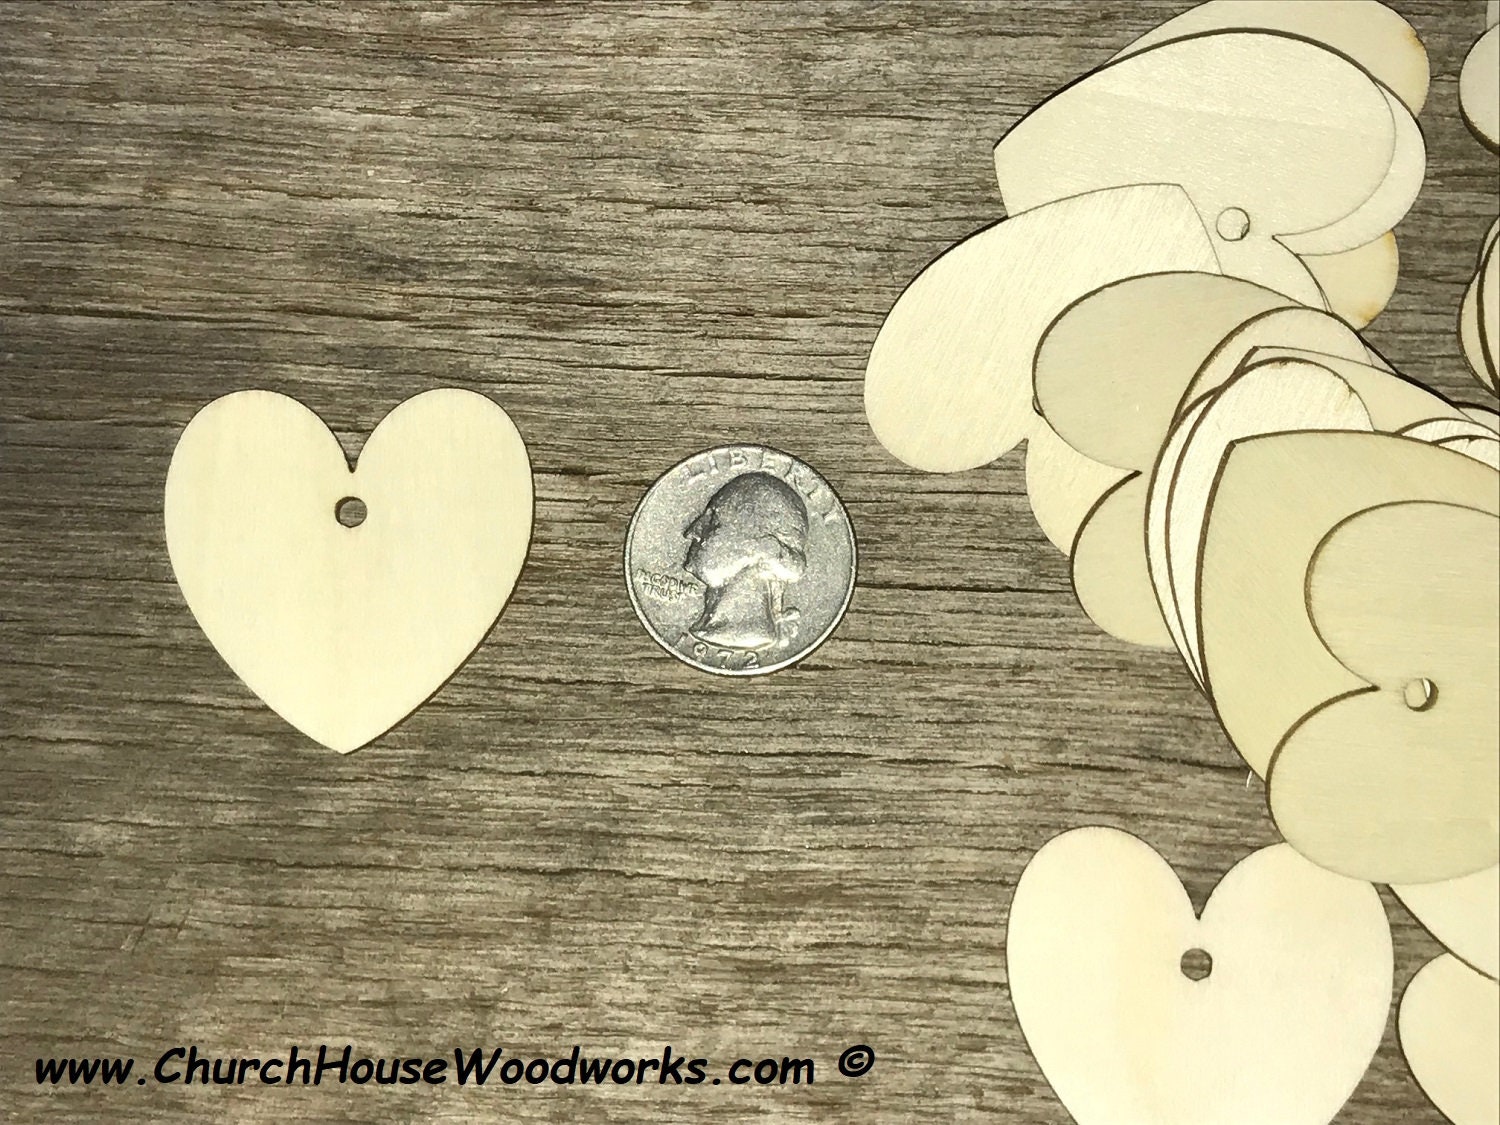 Wooden Hearts for Crafts - for Guest Book - Small Wooden Hearts - Wood Tokens - Cutout Hearts - Wood Hearts for Crafts 50 Pieces (Rustic Hearts)